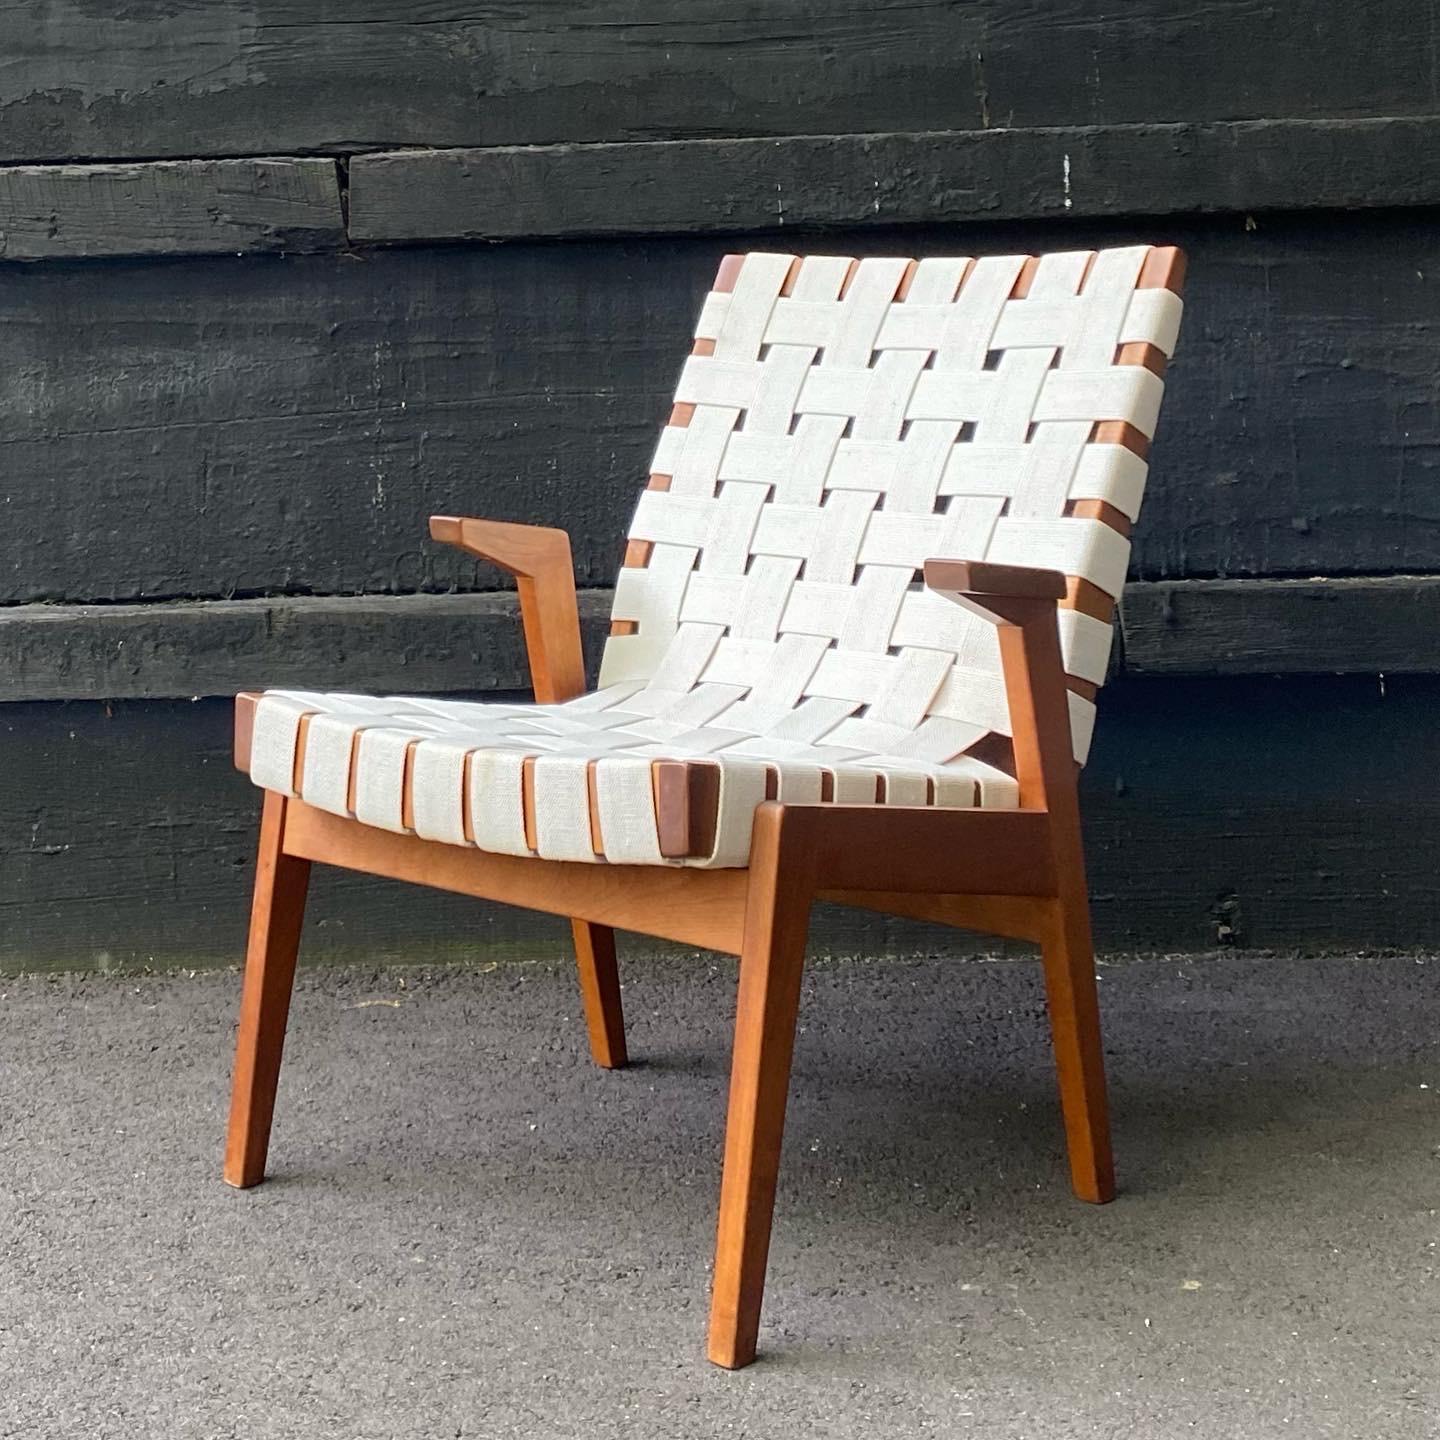 20th Century Arden Riddle Studio Craft Solid Cherry Lounge Chair with White Webbing, ca. 1970